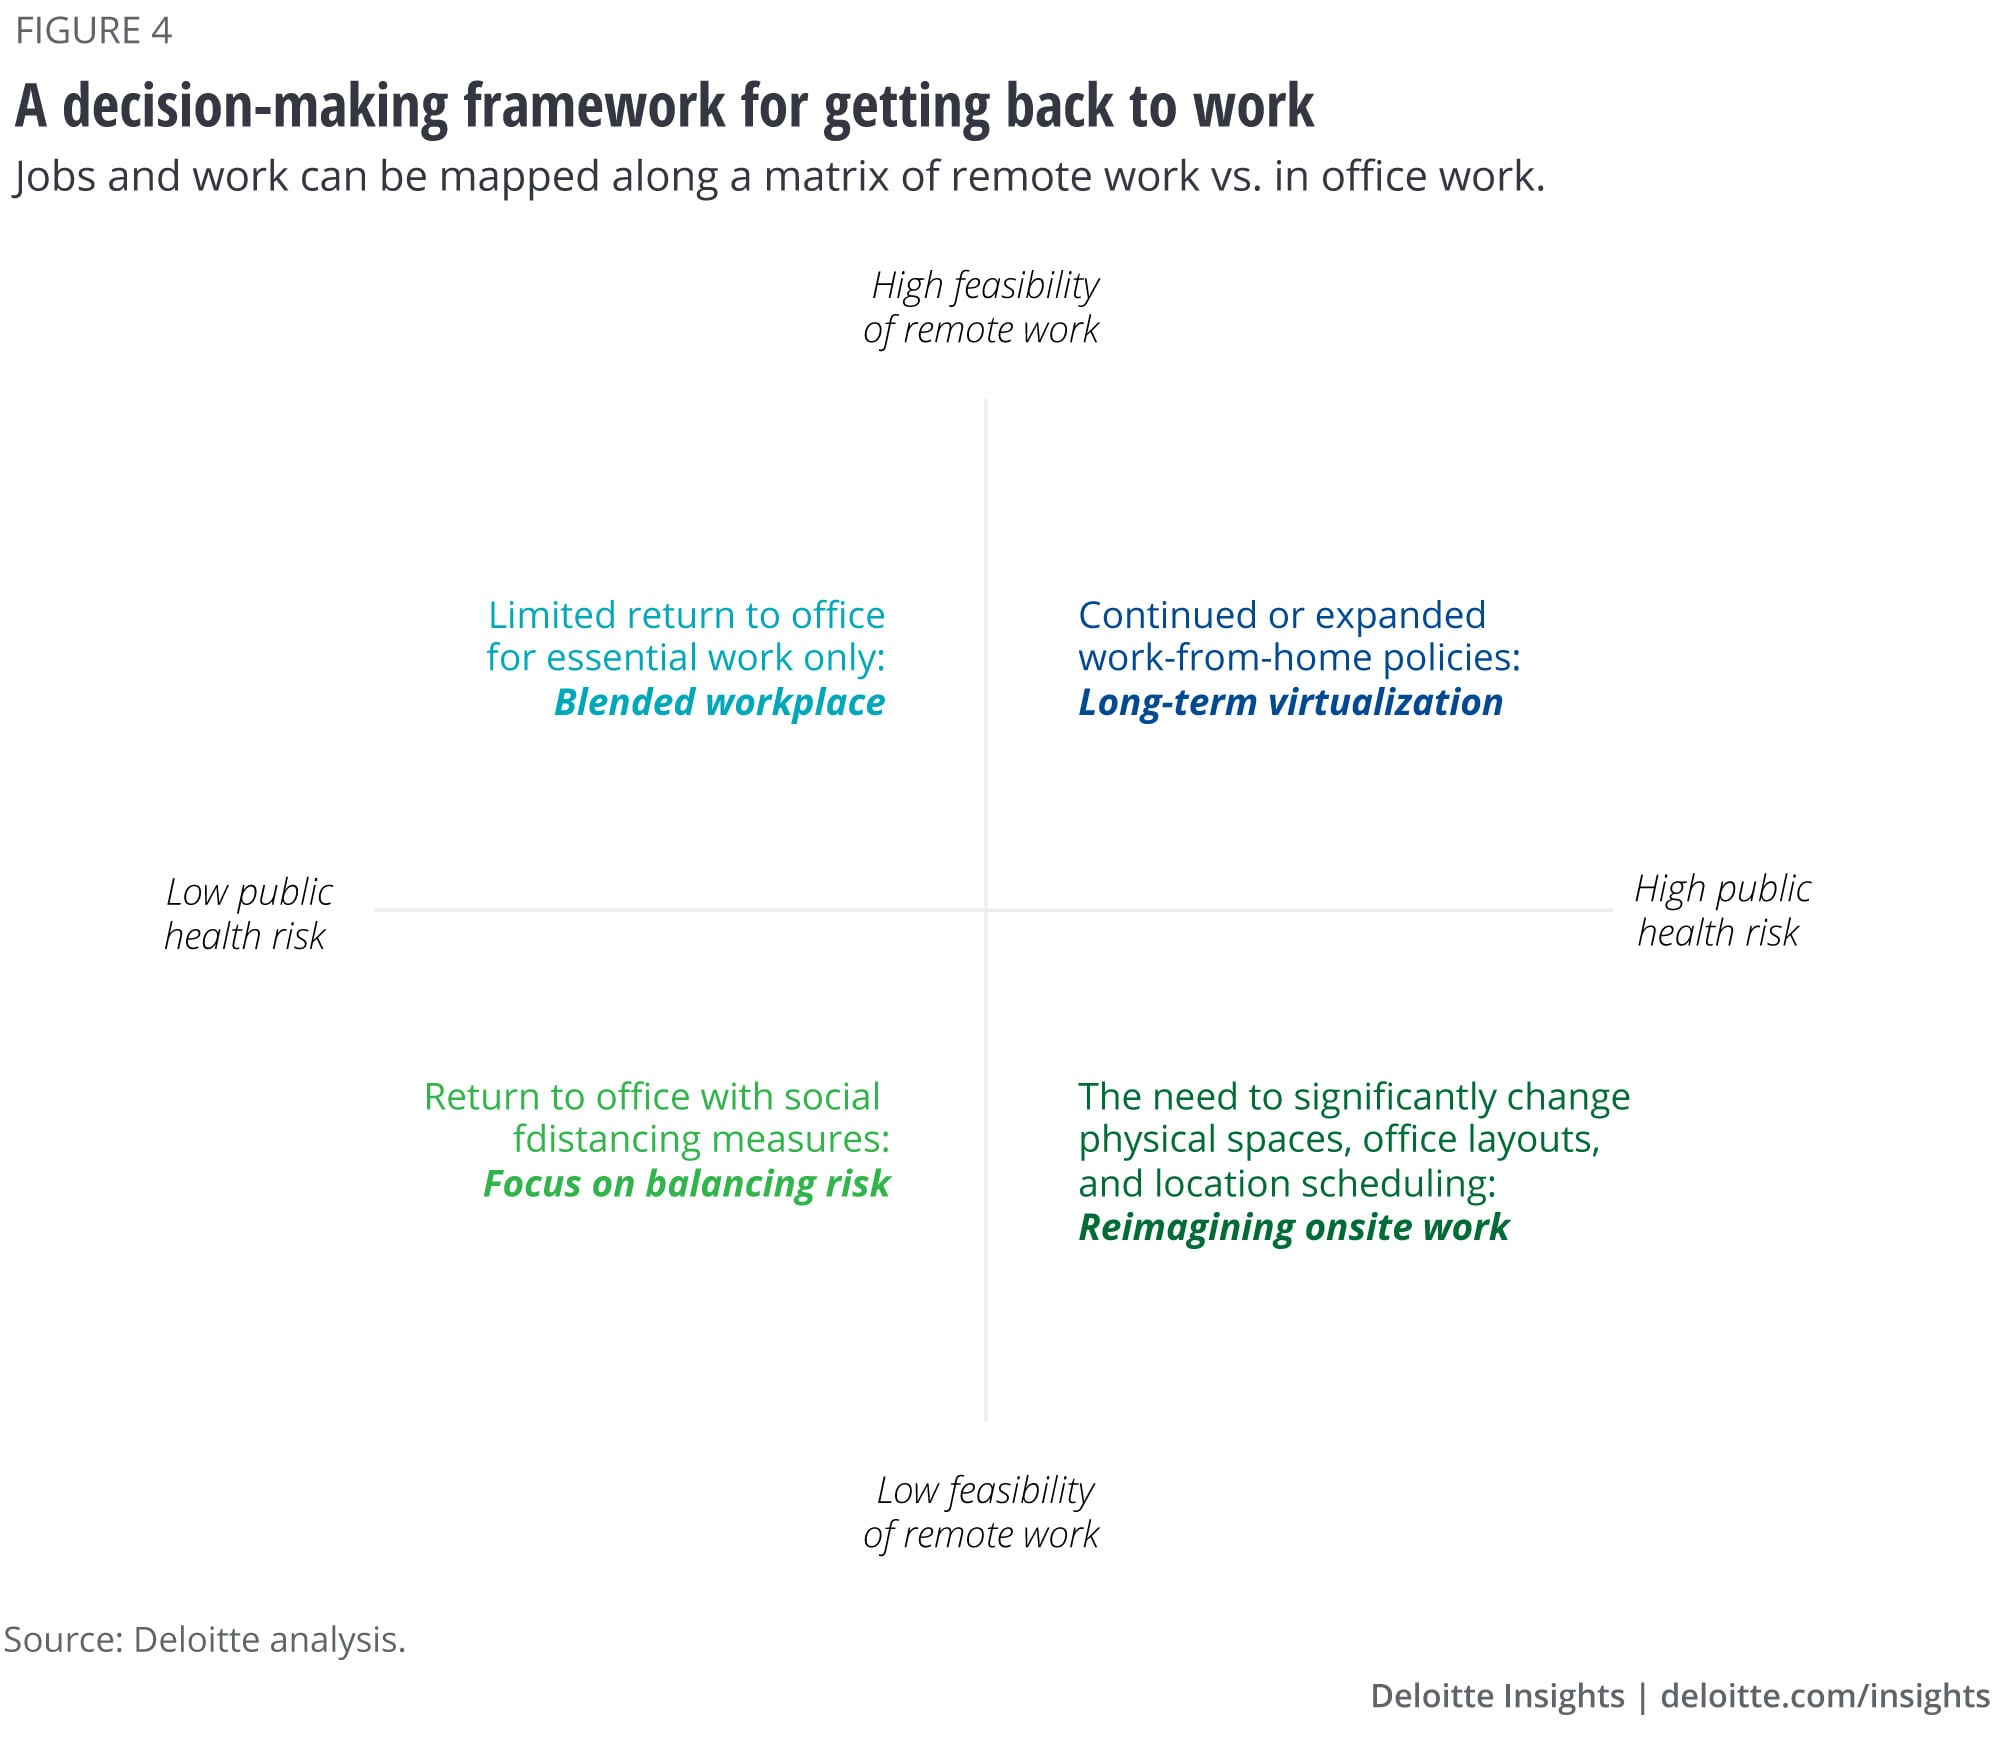 A decision-making framework for getting back to work